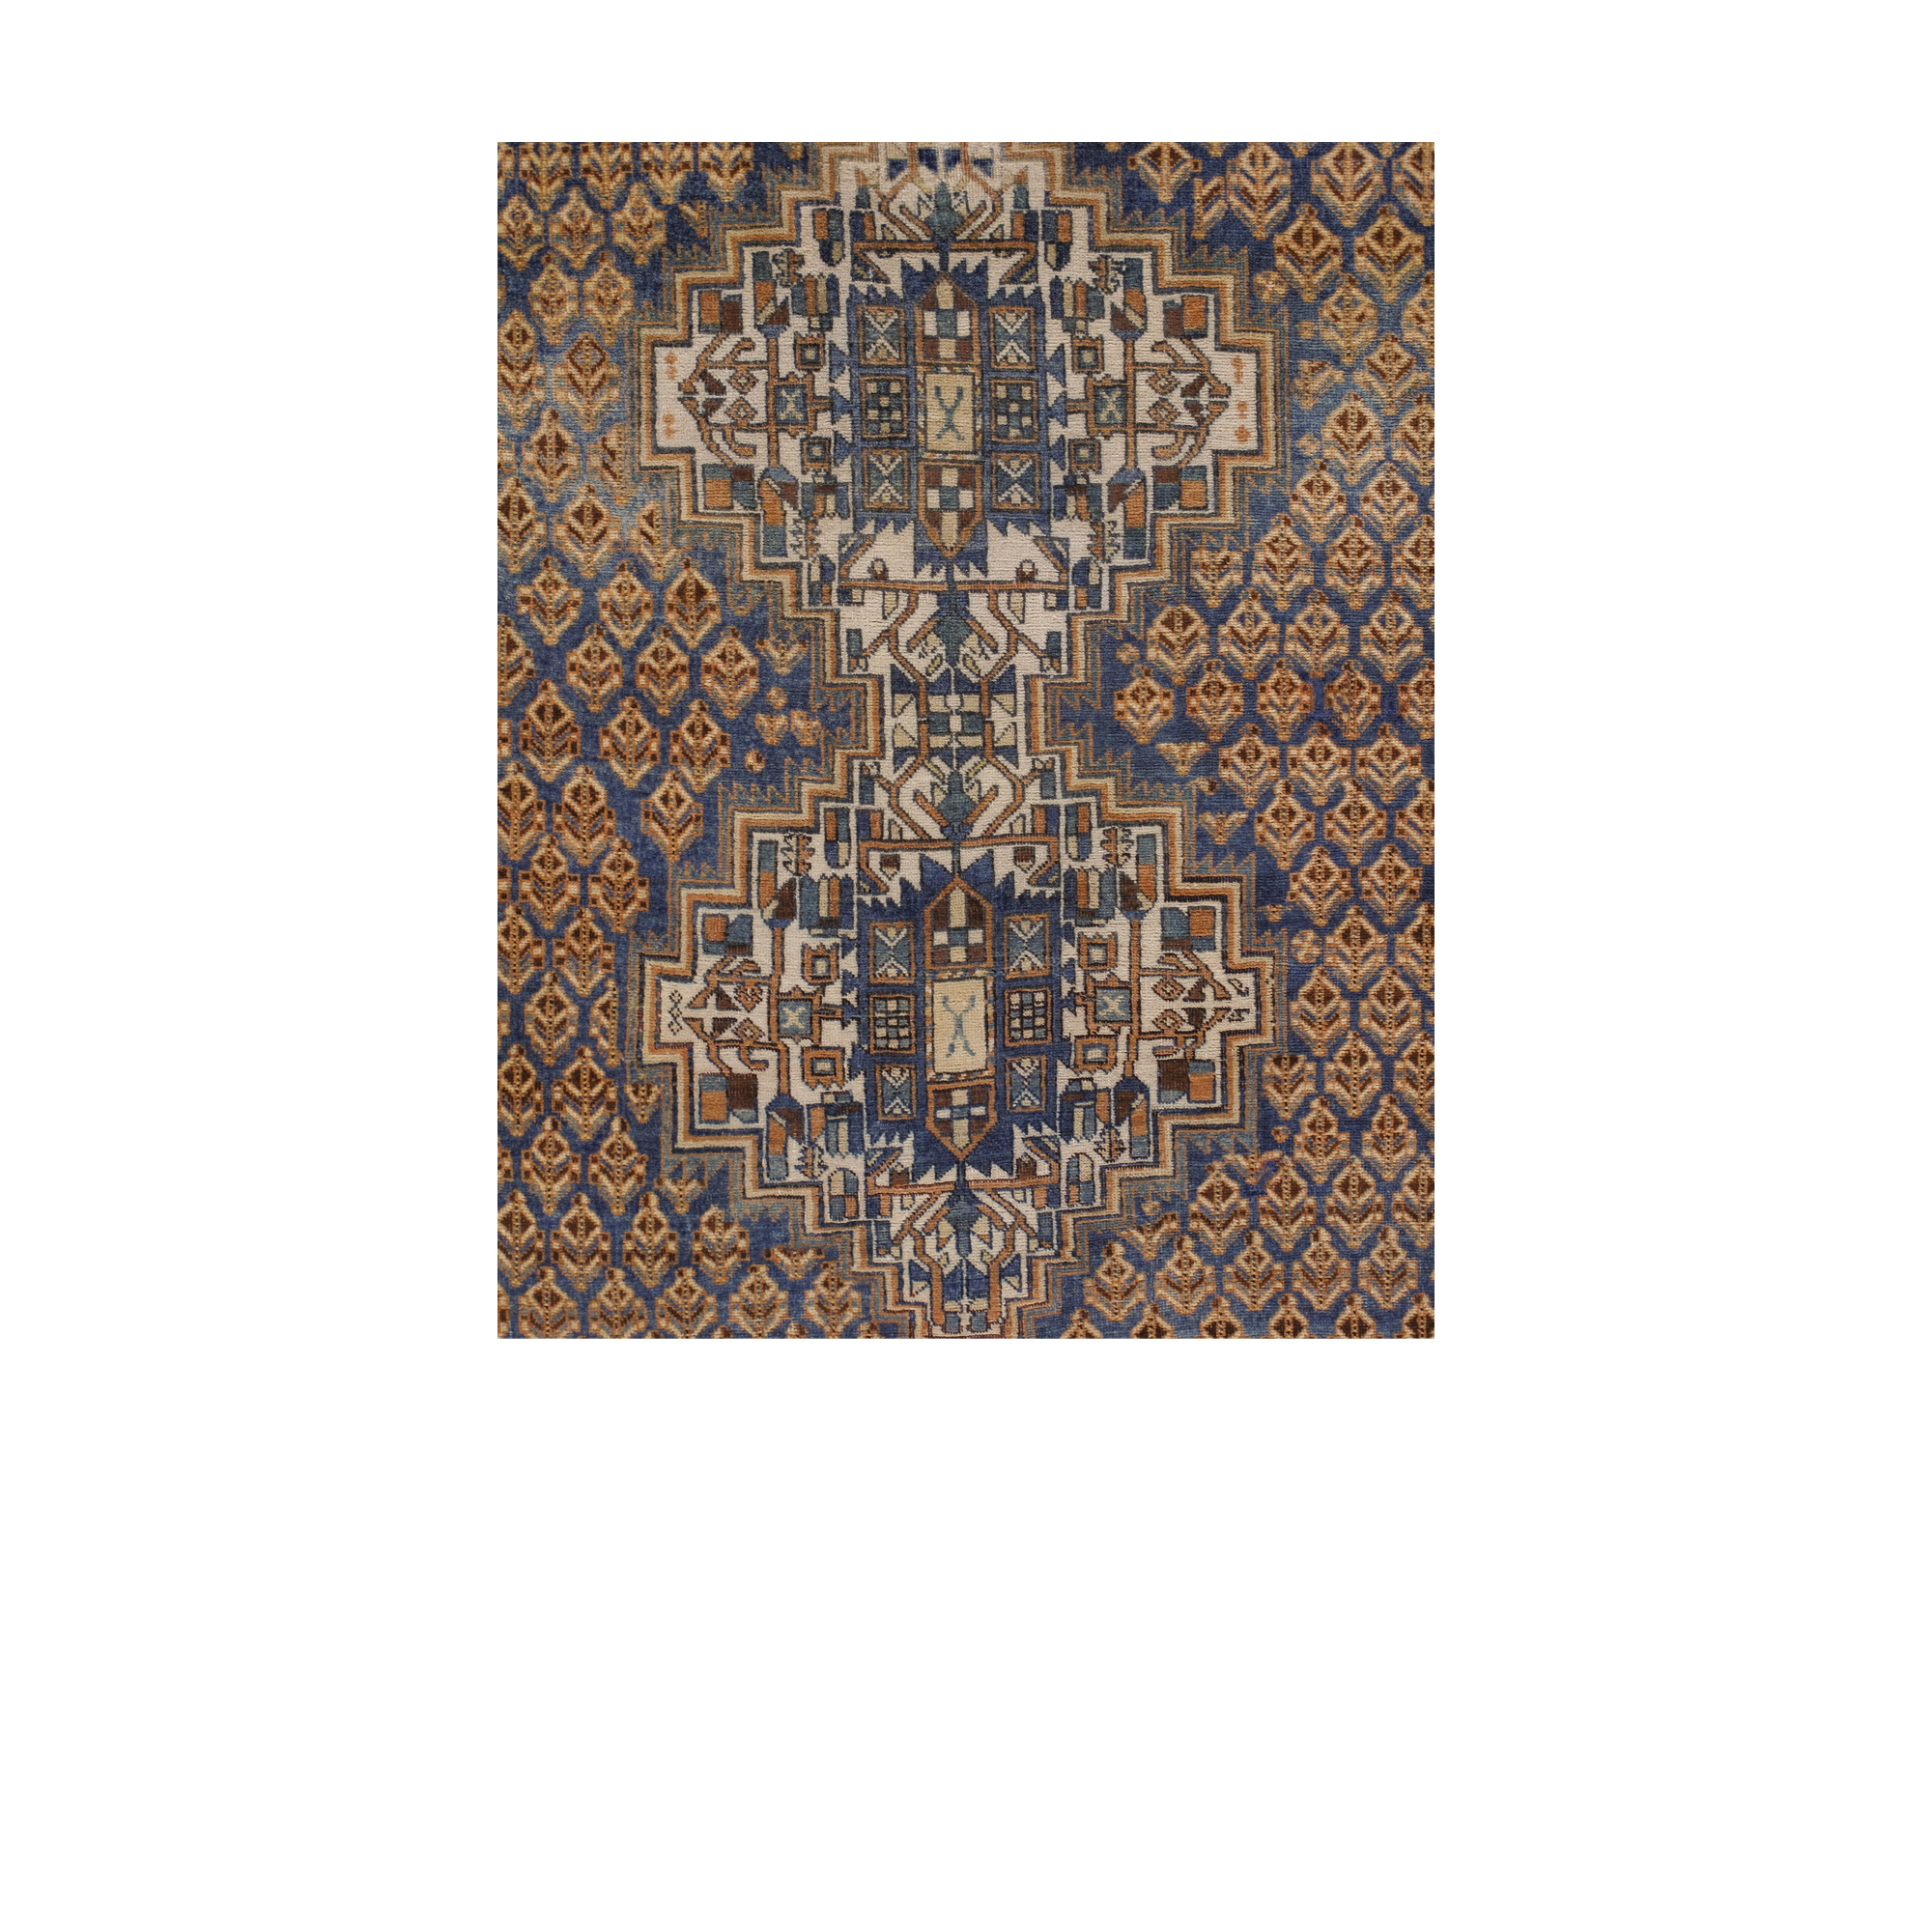 Afshan rug is an antique rug designed with large medallions and allover patterns. 